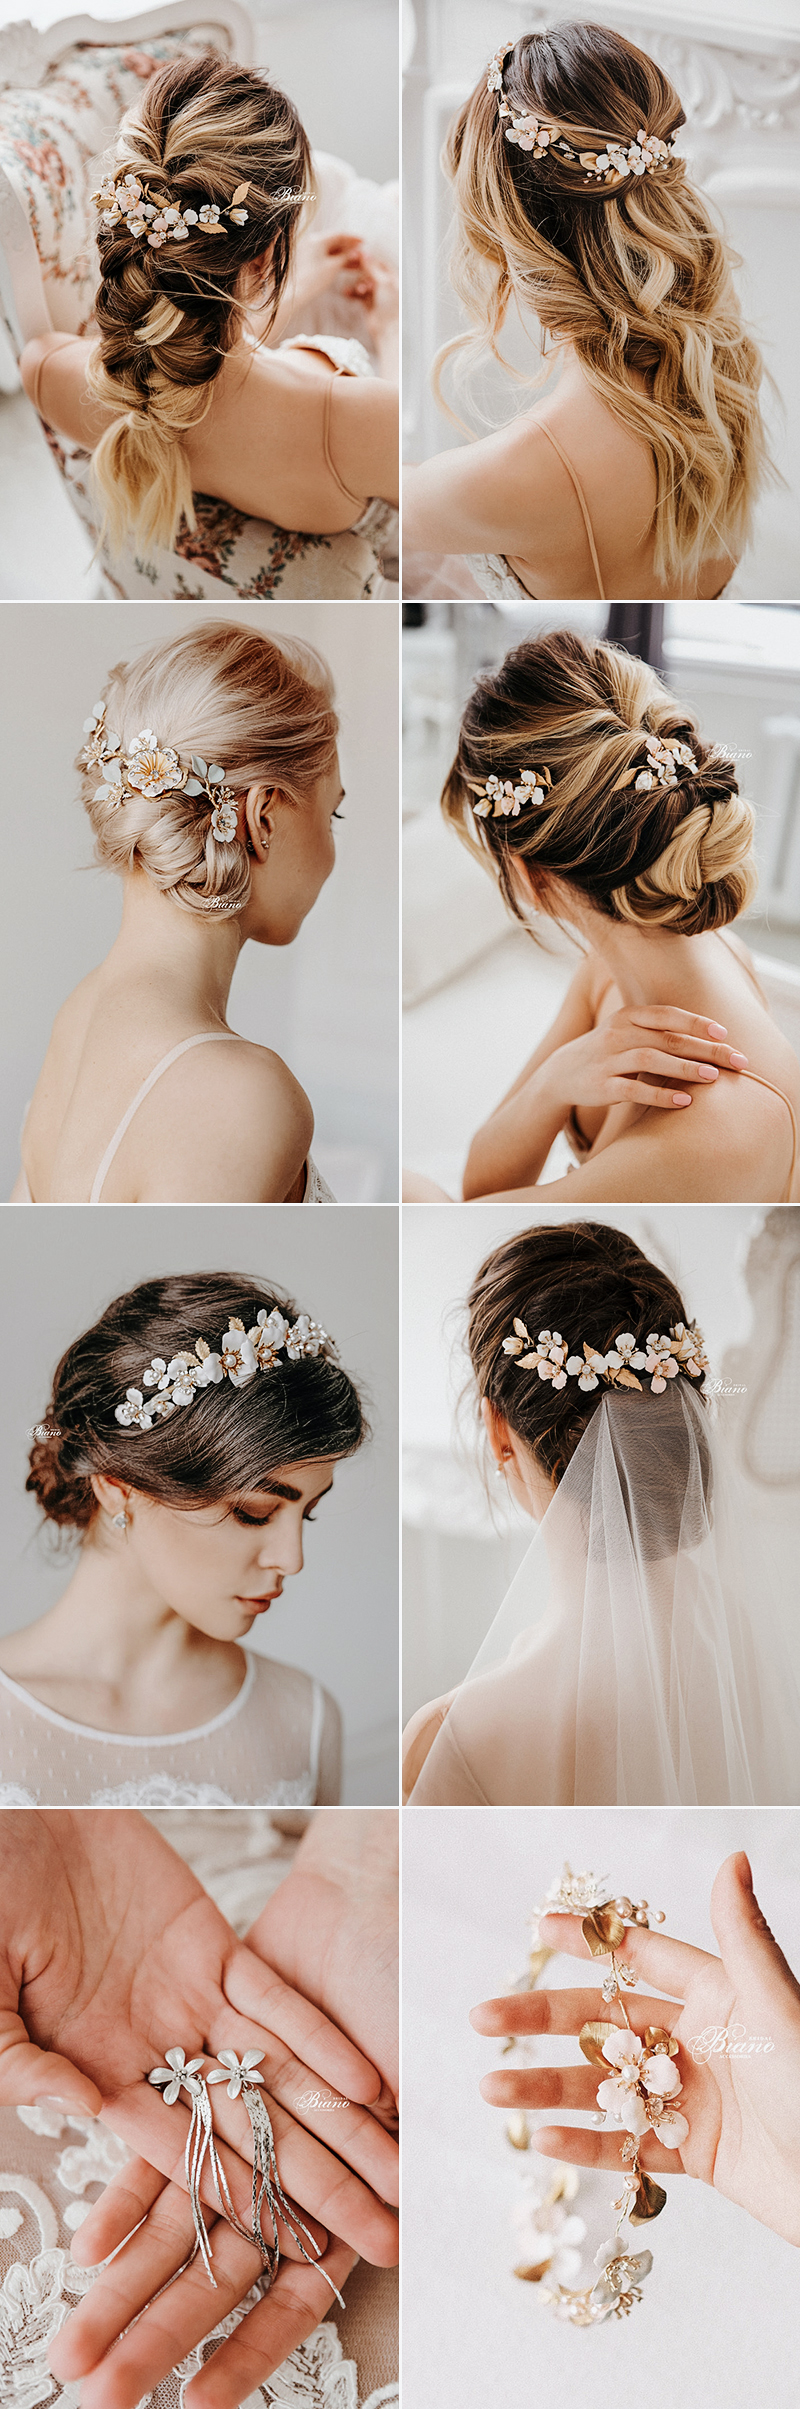 Smart Tips For Choosing Your Wedding Accessories - New York Bride